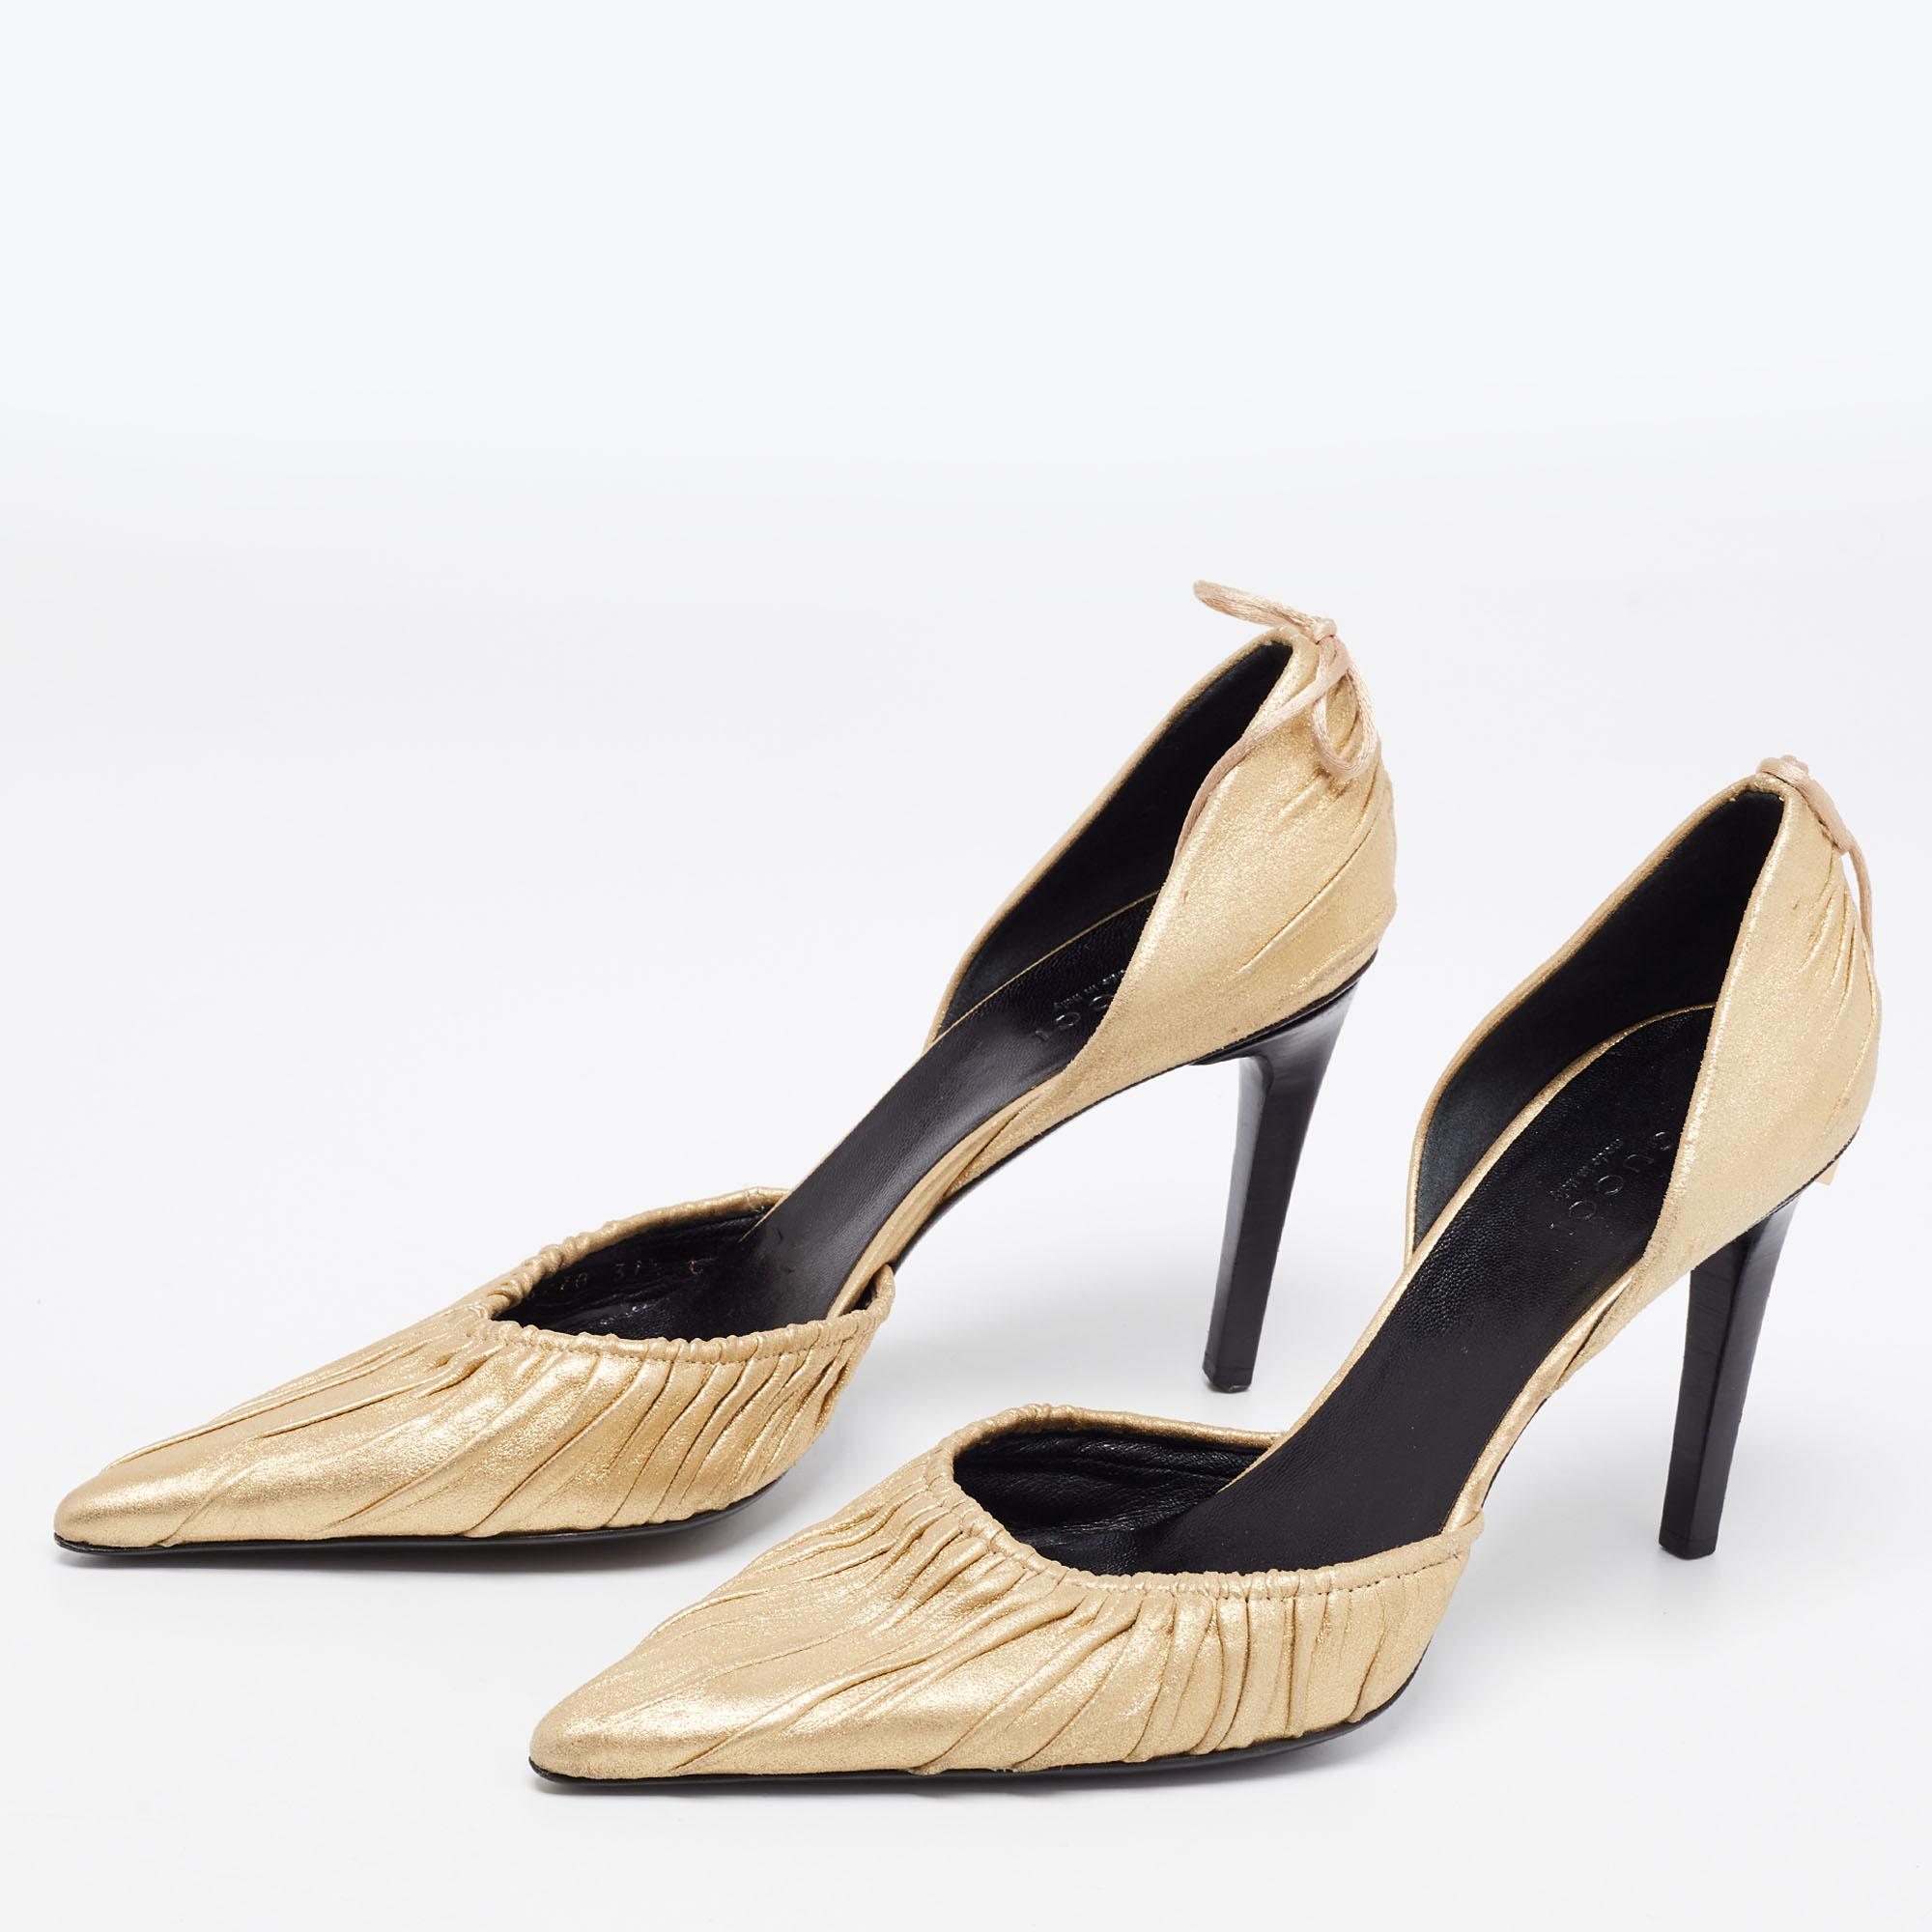 Exuding feminity and elegance, these Gucci pumps feature a simple silhouette with an attractive design. You can wear these pumps for a chic look. They come with a suede construction and are adorned with bow ties on the counters.

